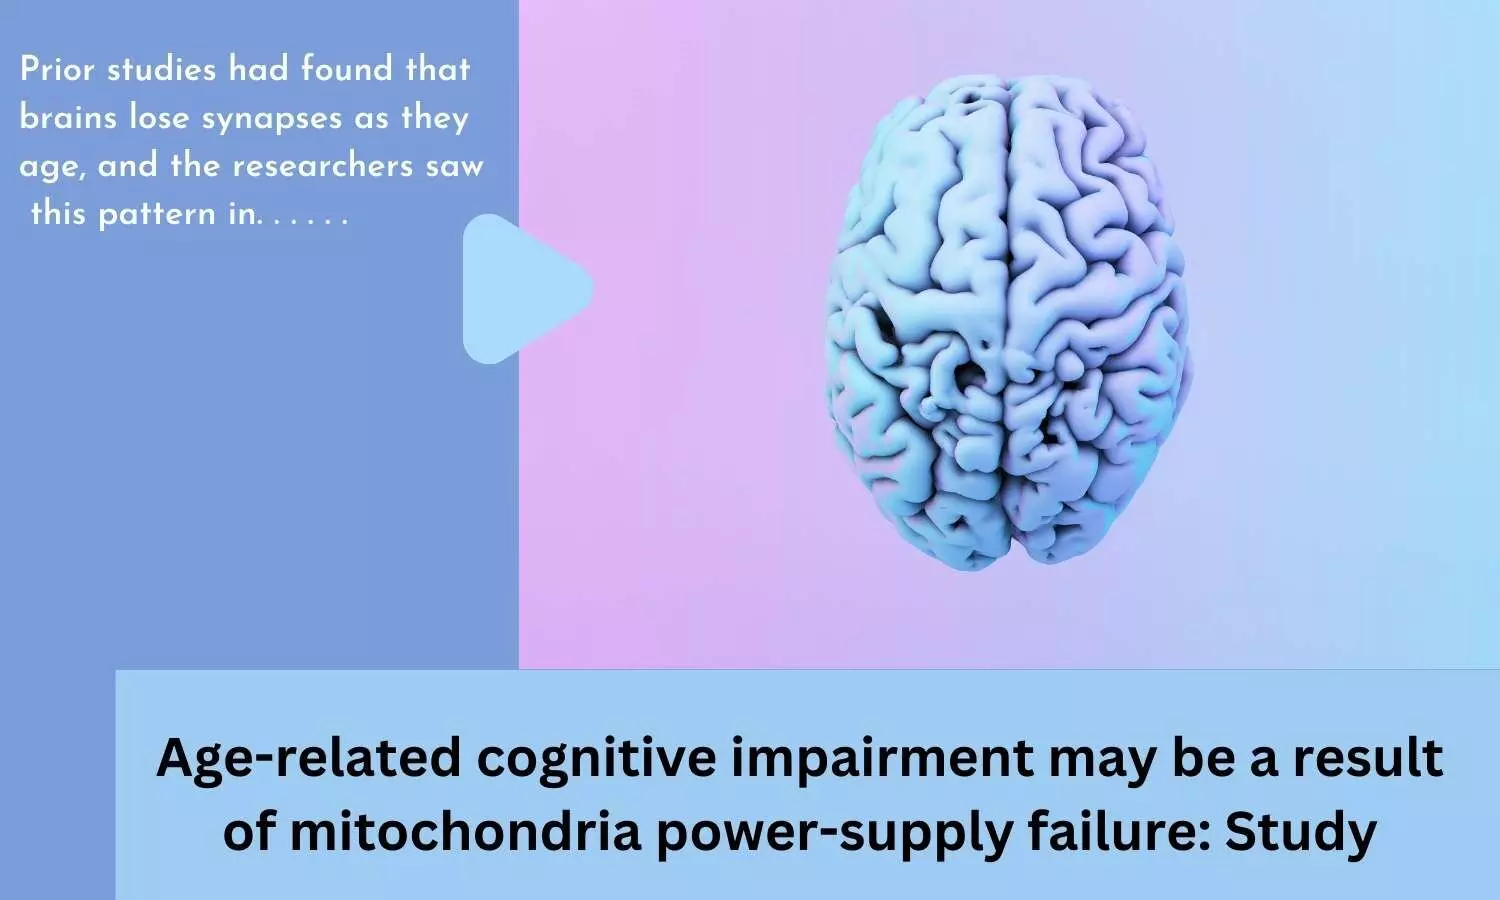 Age-related cognitive impairment may be a result of mitochondria power-supply failure: Study